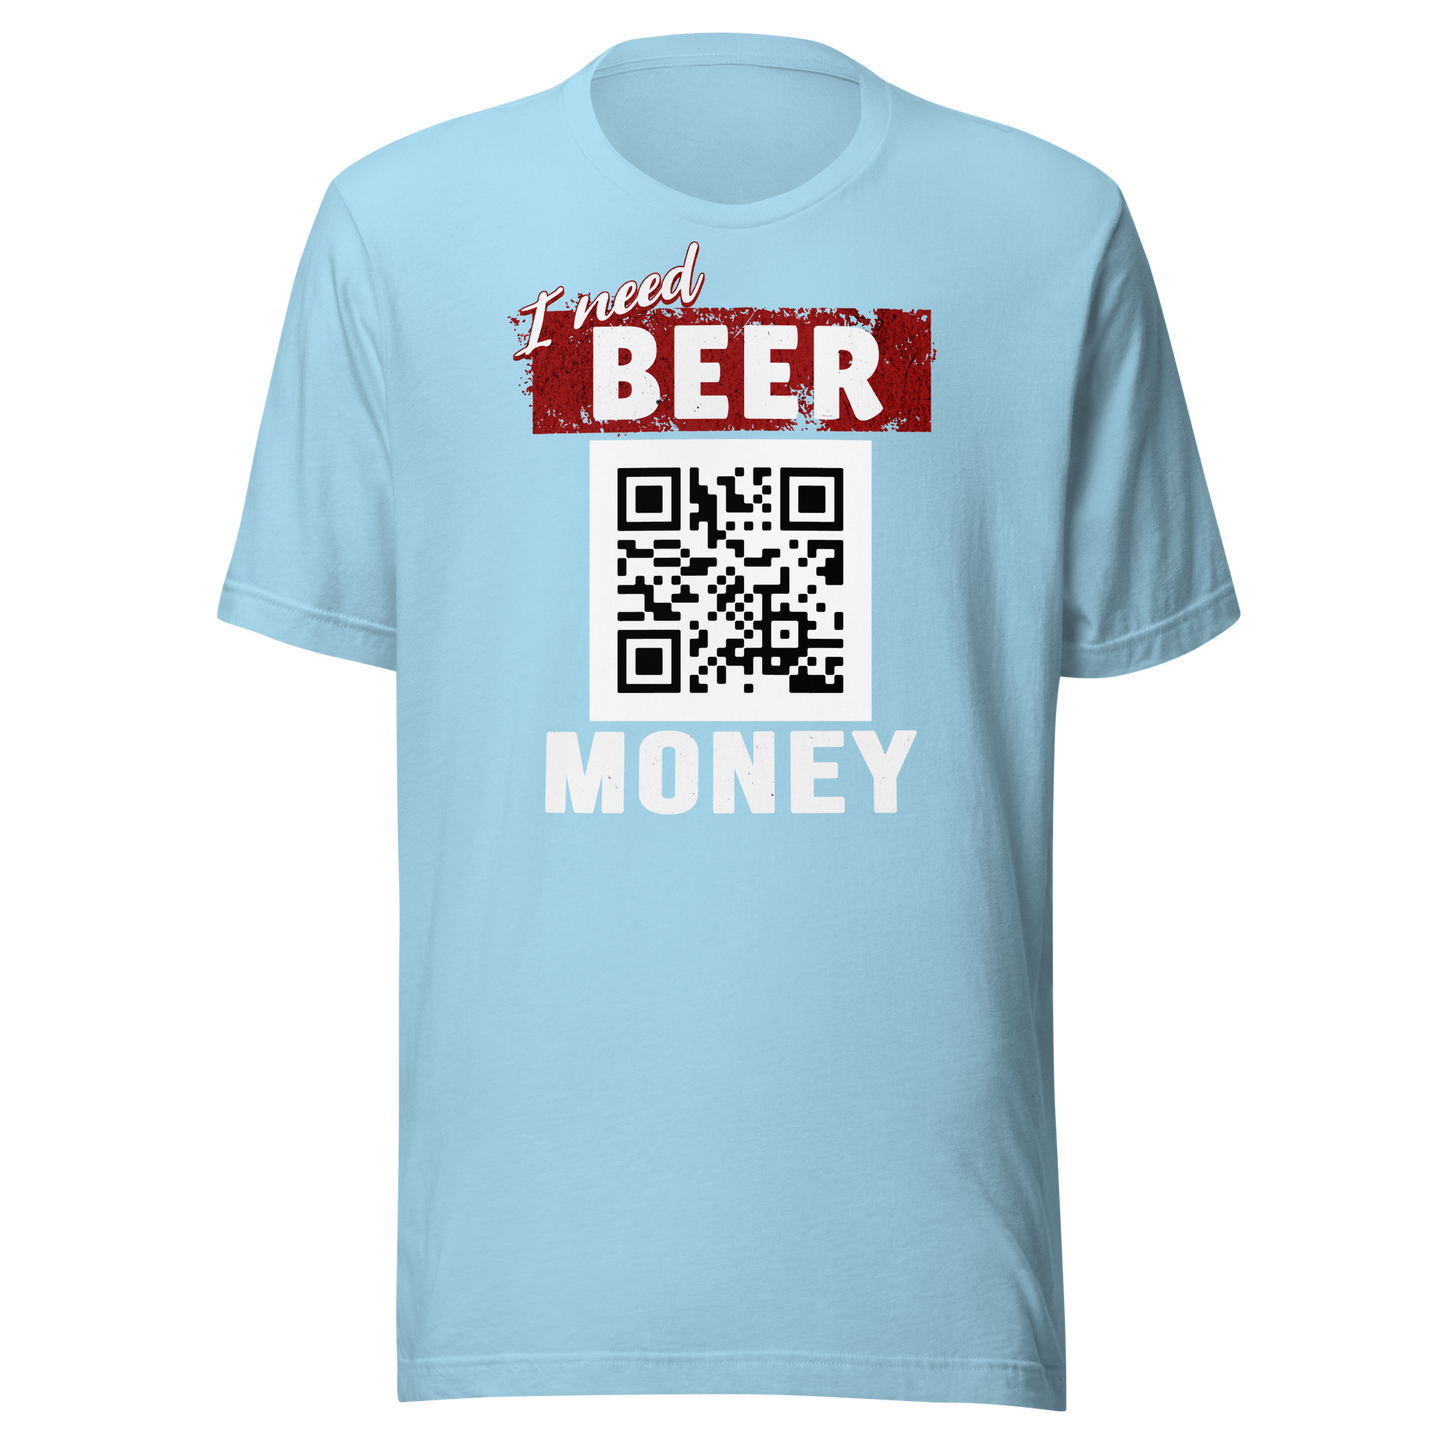 I Need Beer Money T-shirt - Personalizable